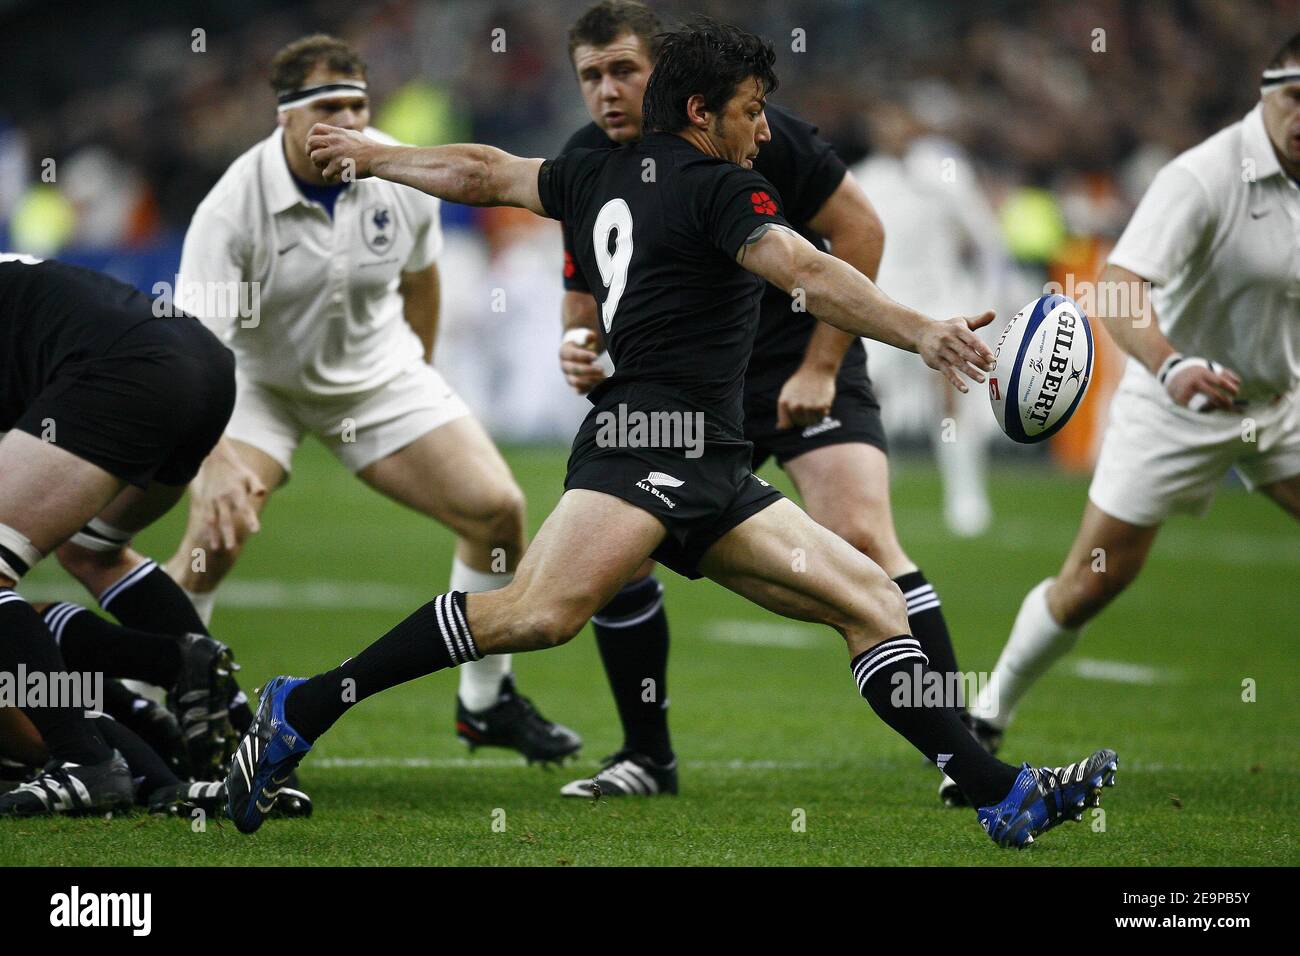 All Blacks' Byron Kelleher in action during the rugby union test match,  France vs New Zealand at the Stade de France, in Saint Denis, near Paris,  France on November 18, 2006. New